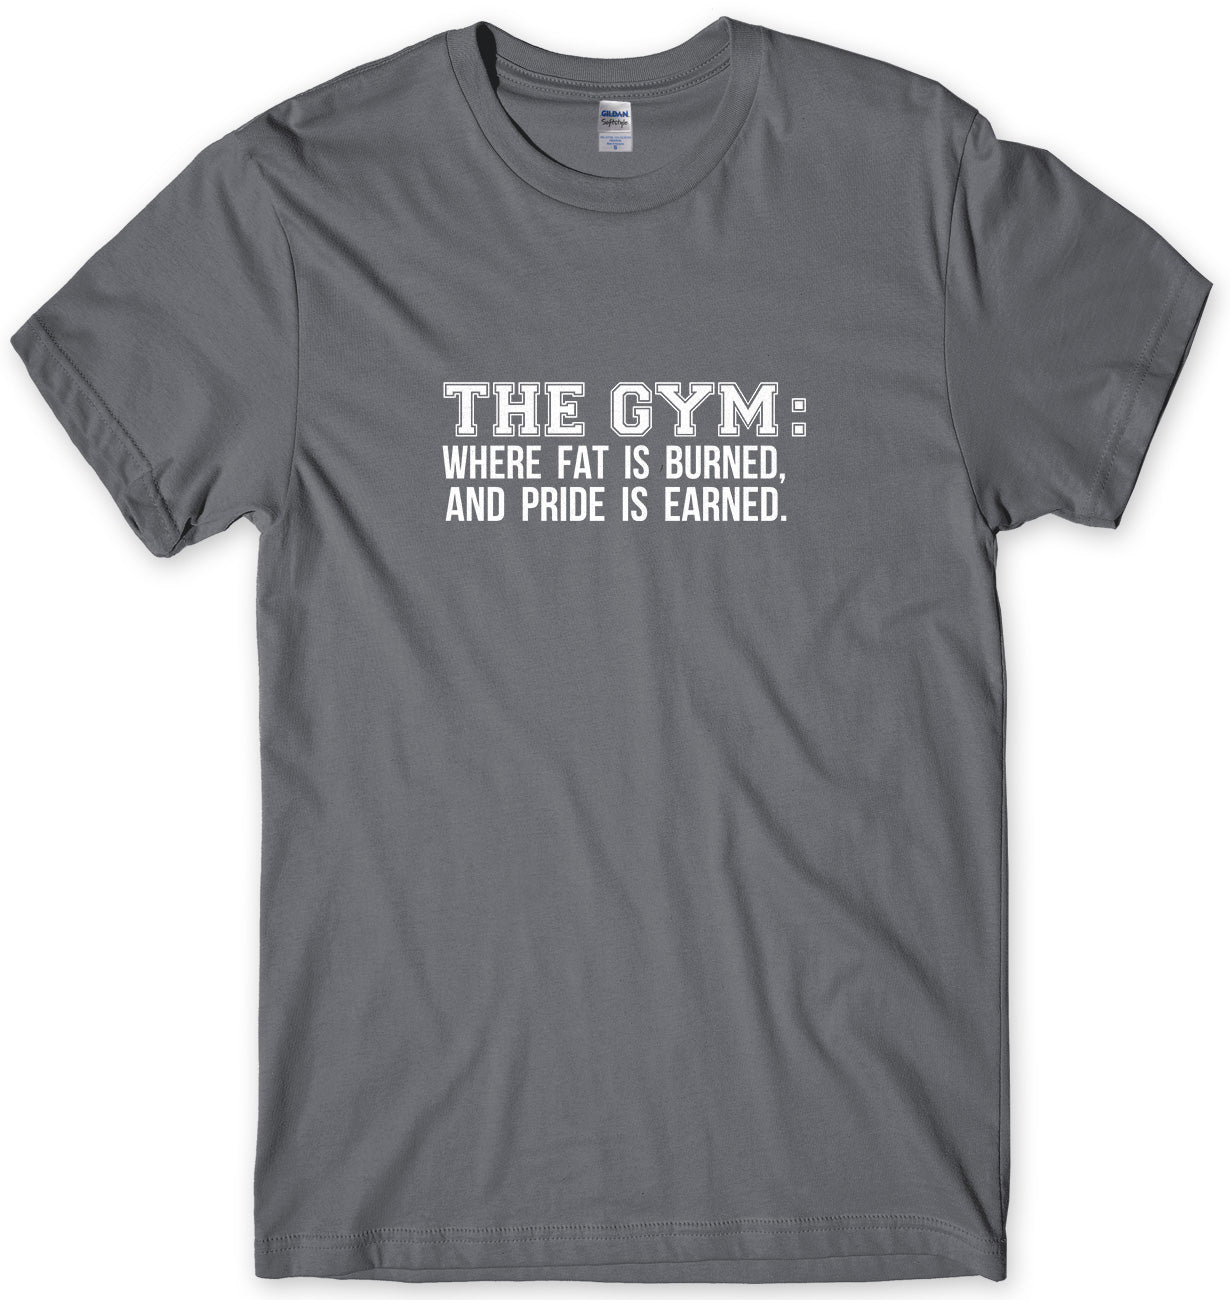 The Gym: Where Fat Is Burned And Pride Is Earned Mens Unisex T-Shirt